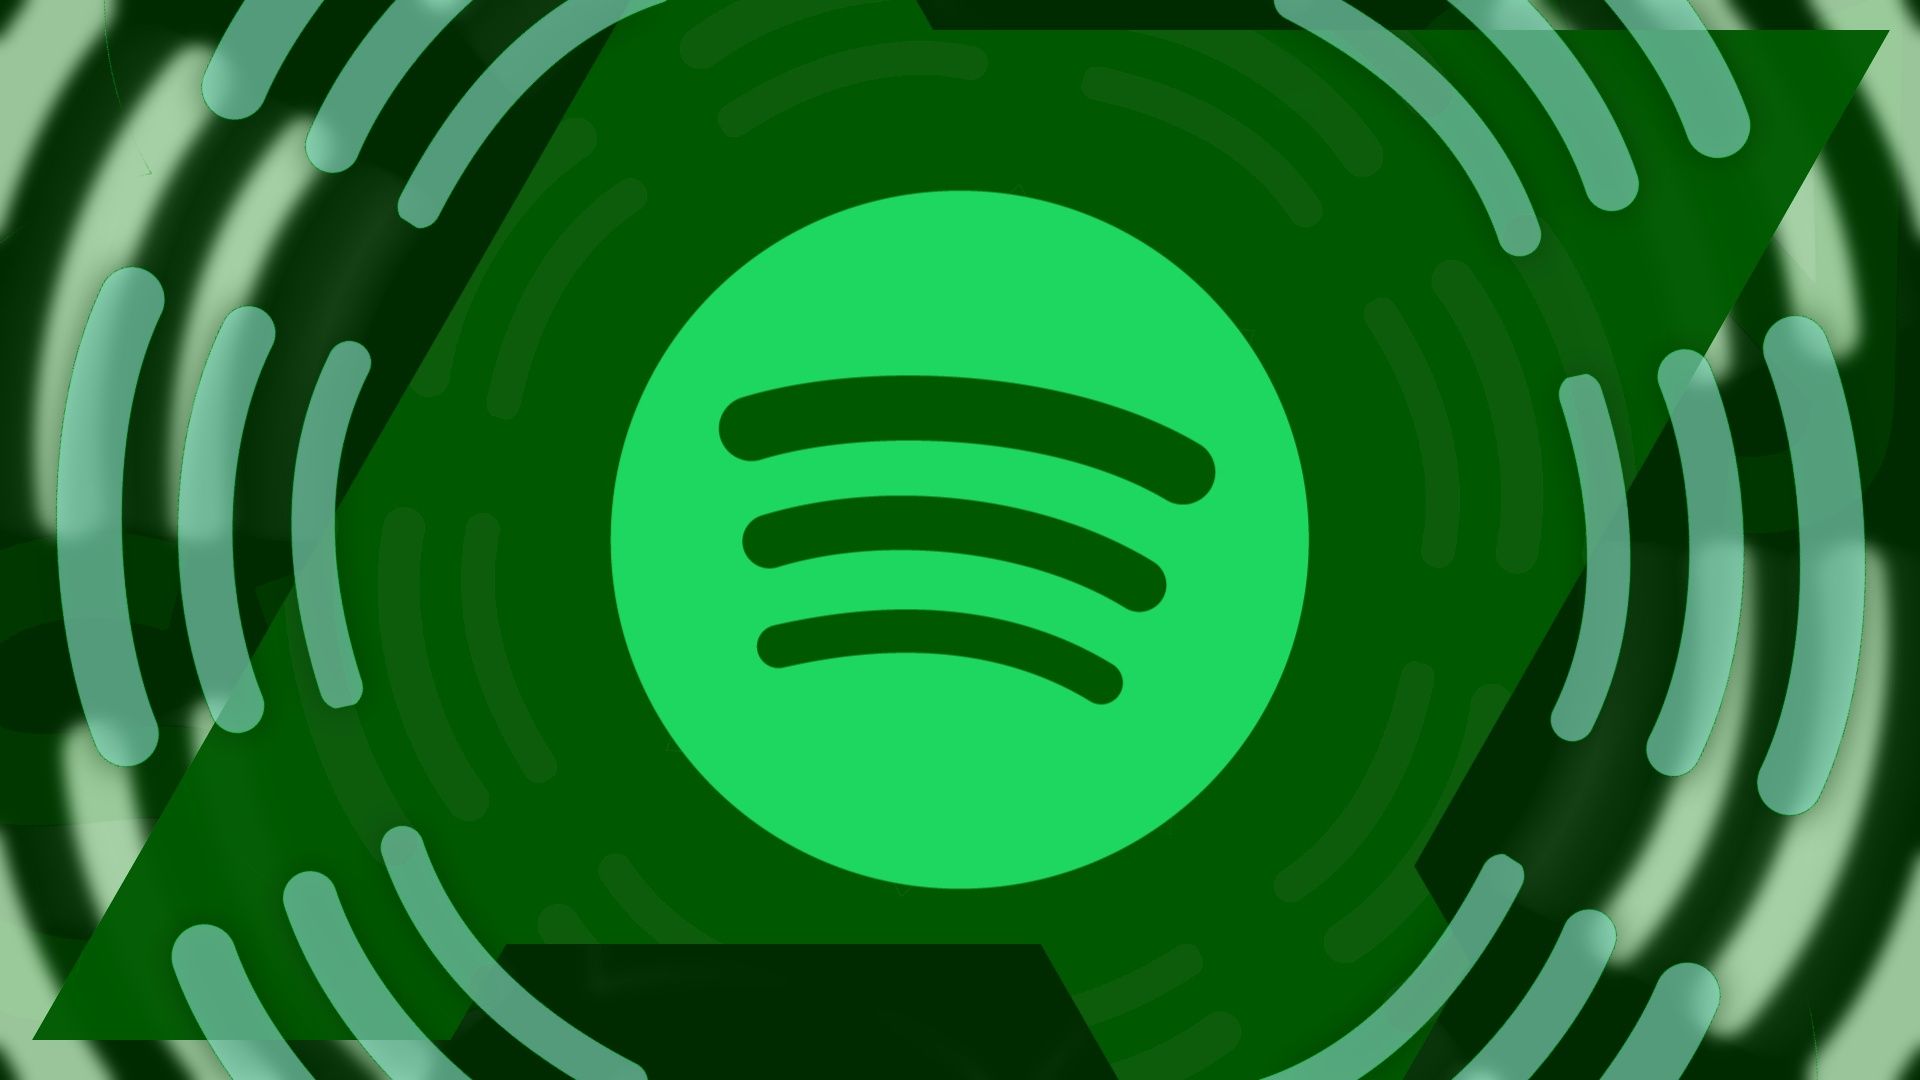 The Spotify logo within the AP initials